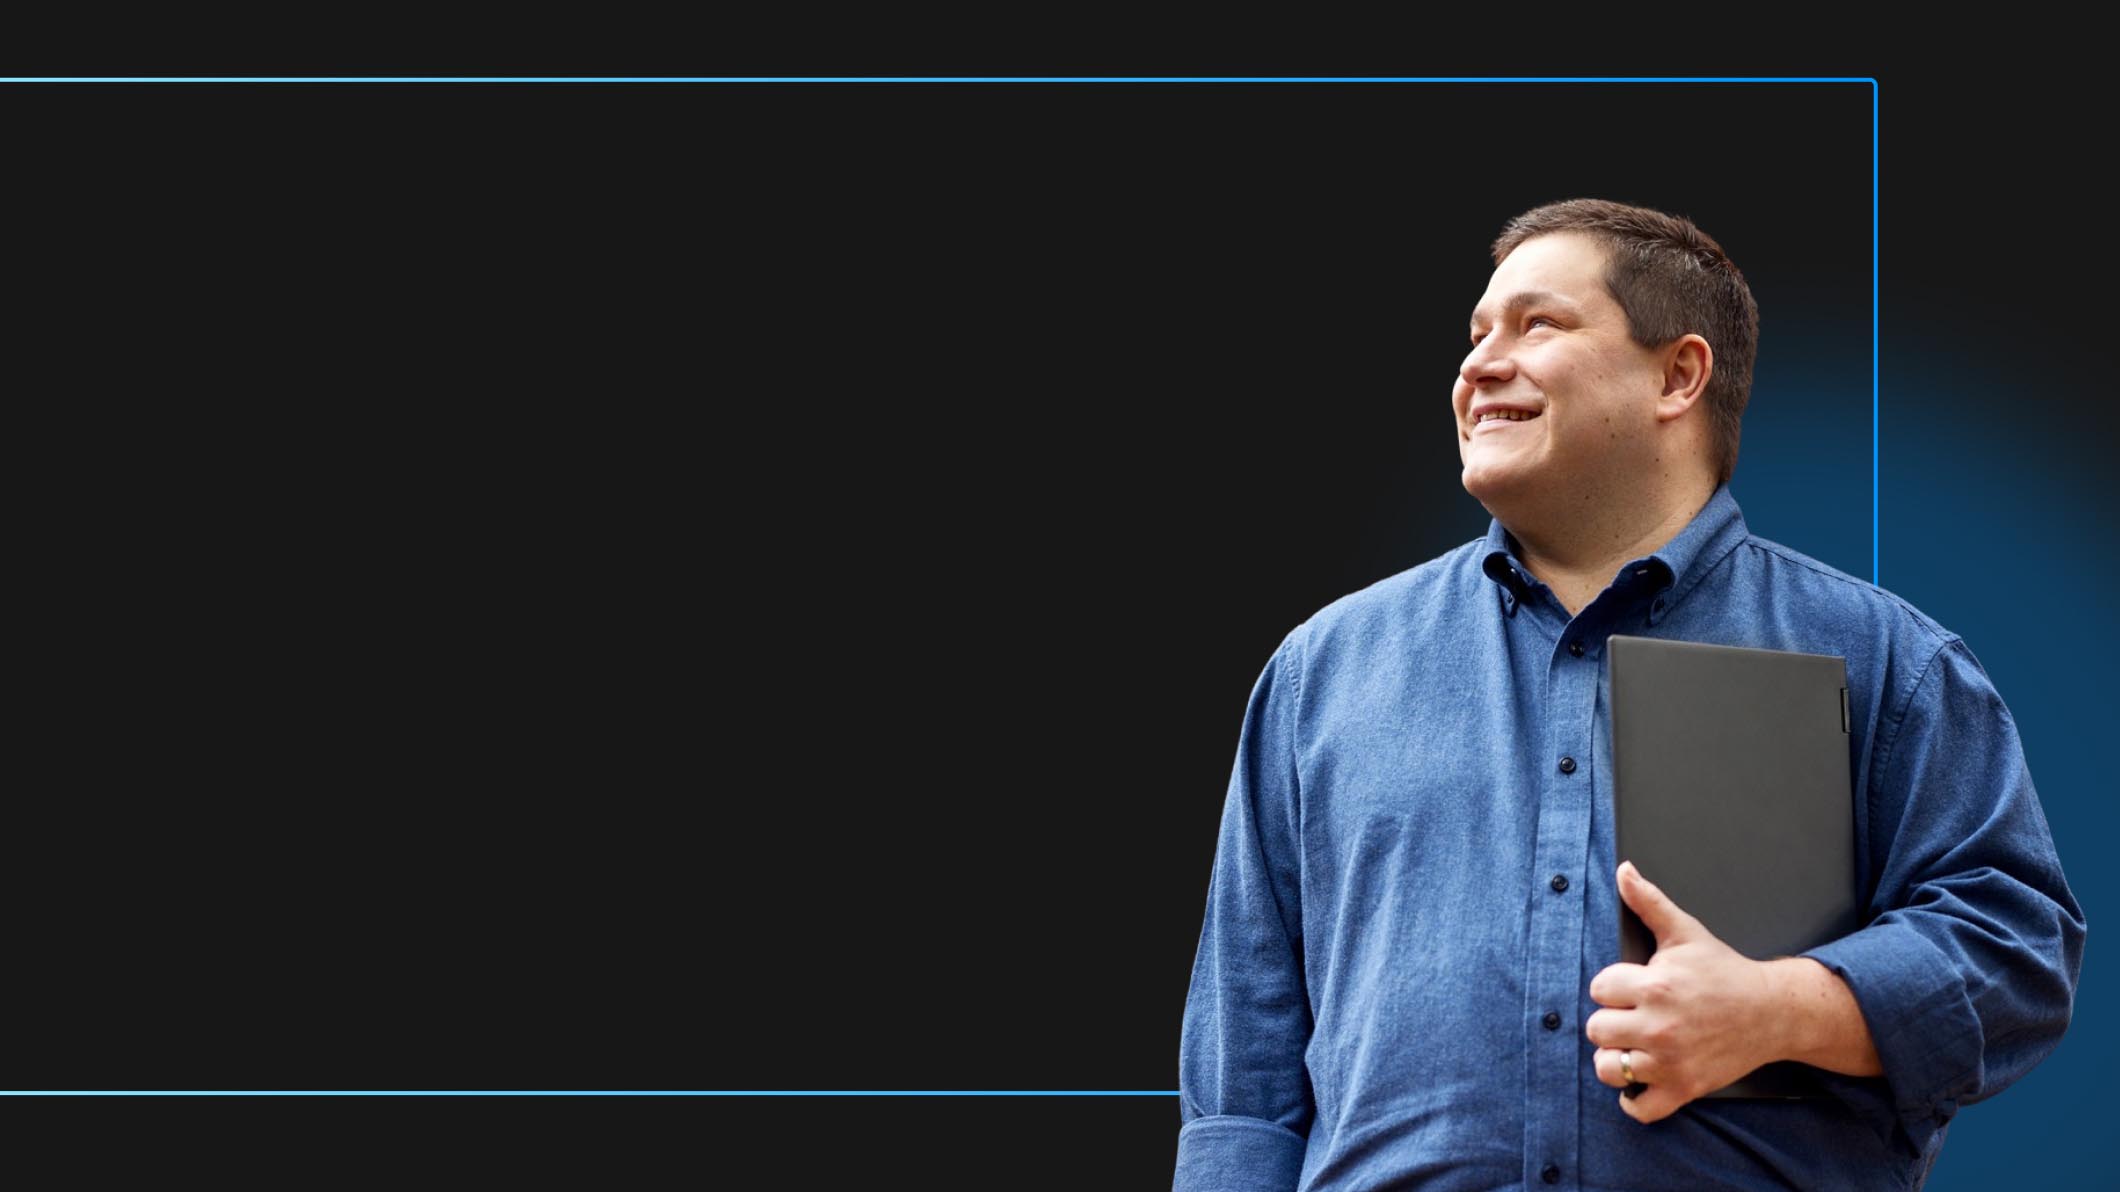 Sr. Cloud Security Consultant Alan Armstrong looks off smiling and holding a Windows device